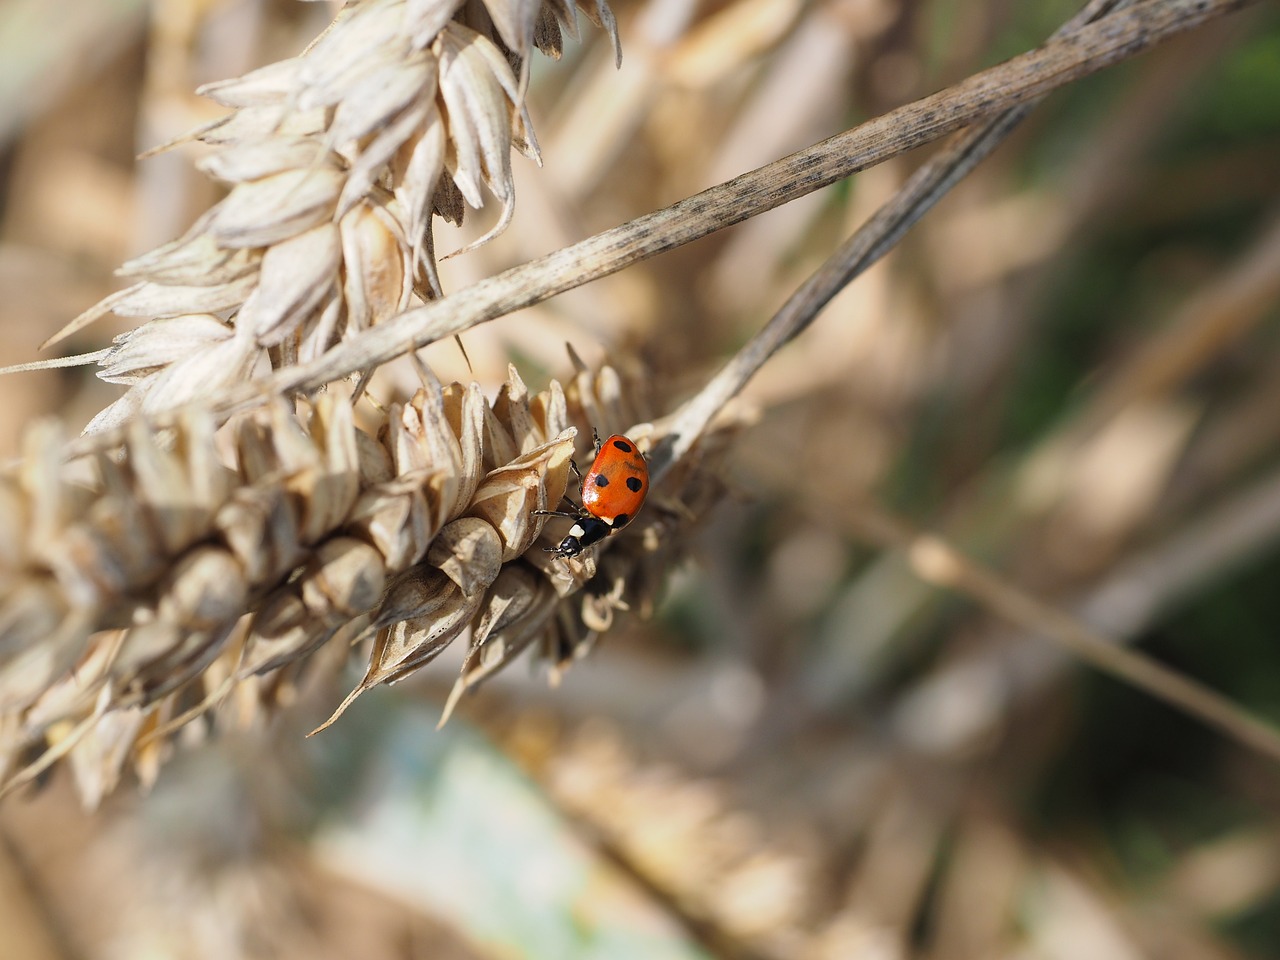 a ladybug sitting on top of a stalk of wheat, bad photo, the goddess of autumn harvest, reportage photo